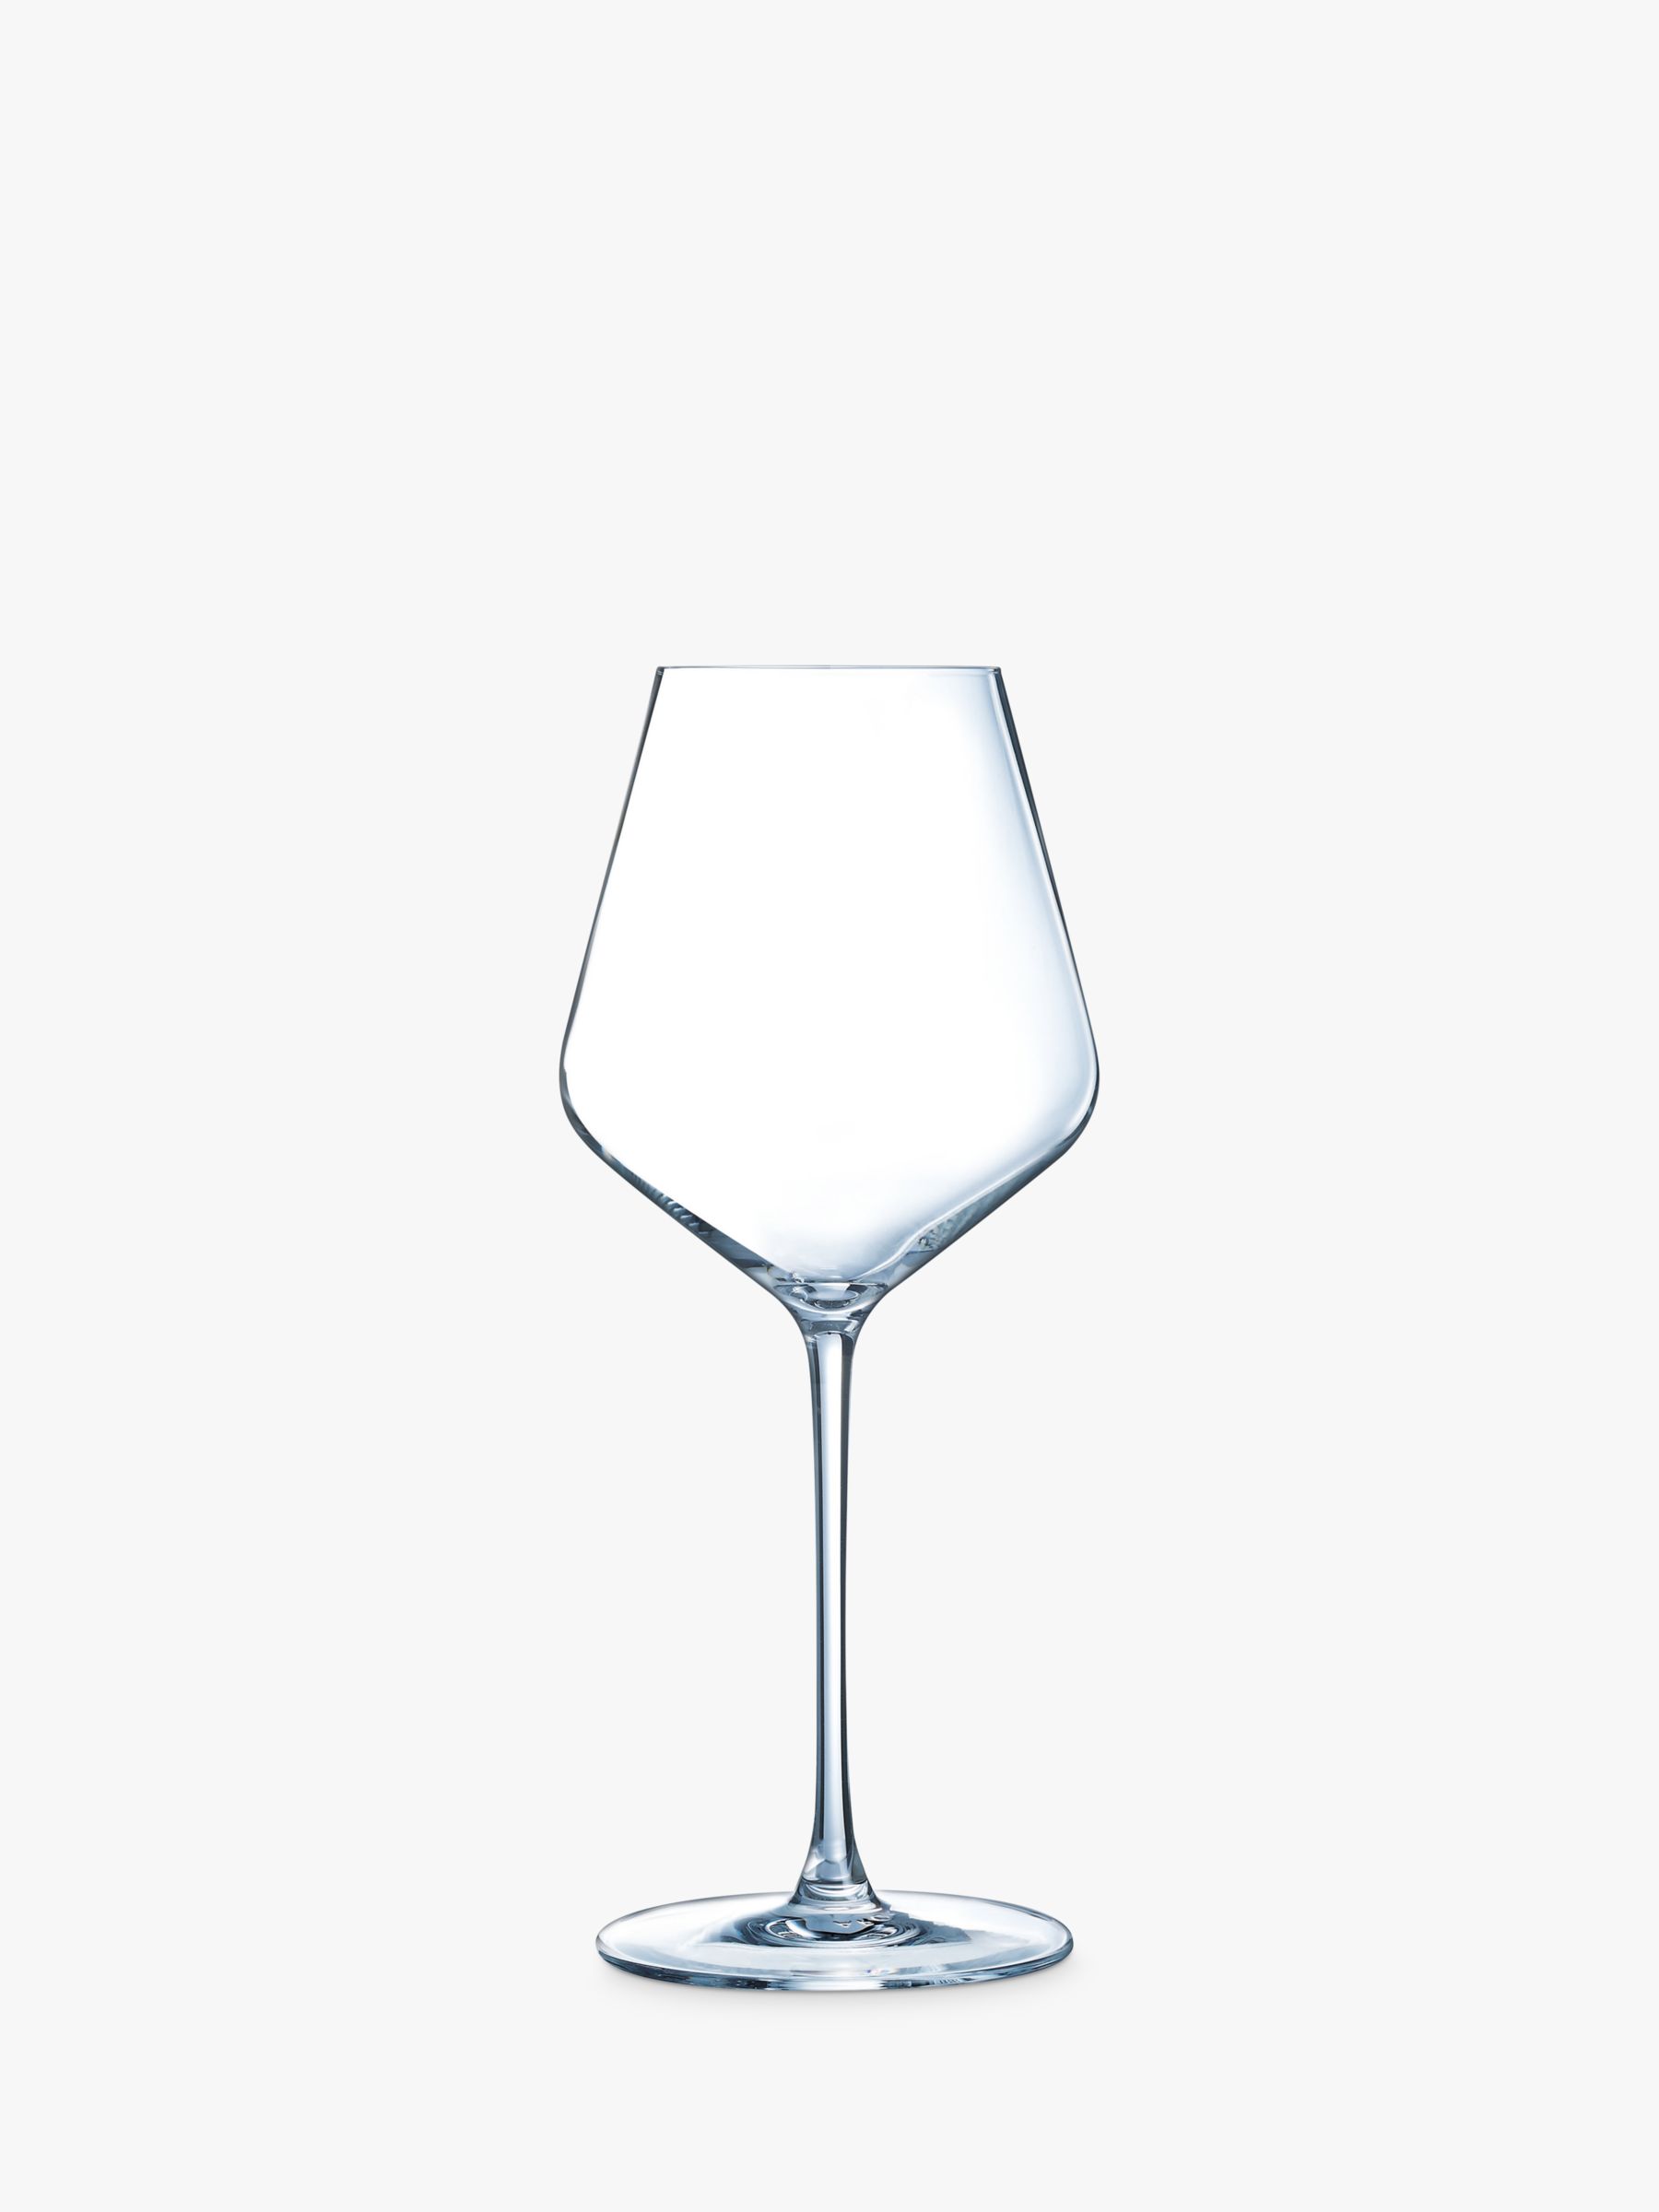 John Lewis Country Short Stem Wine Glass, Clear